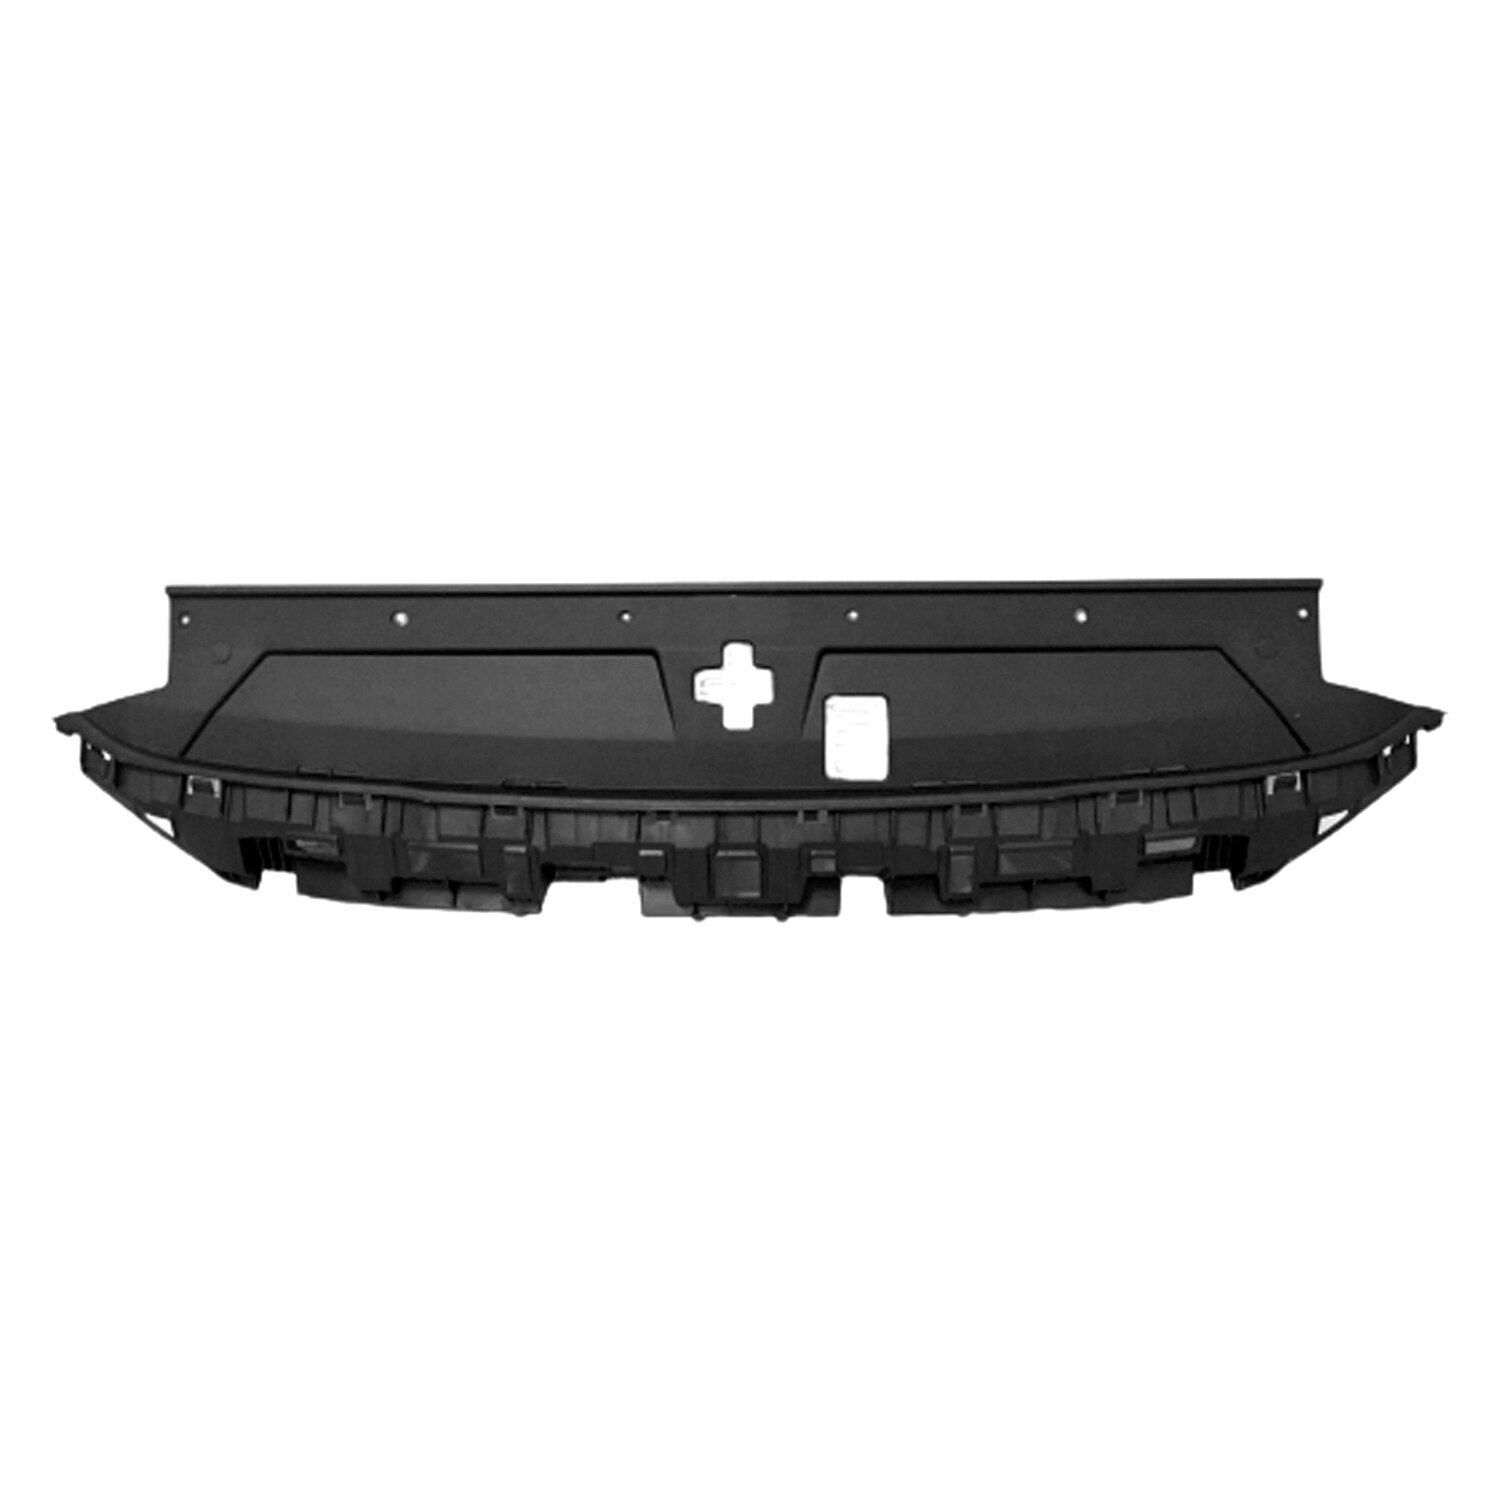 For Hyundai Santa Fe 21-22 Replace Front Radiator Support Cover Standard Line